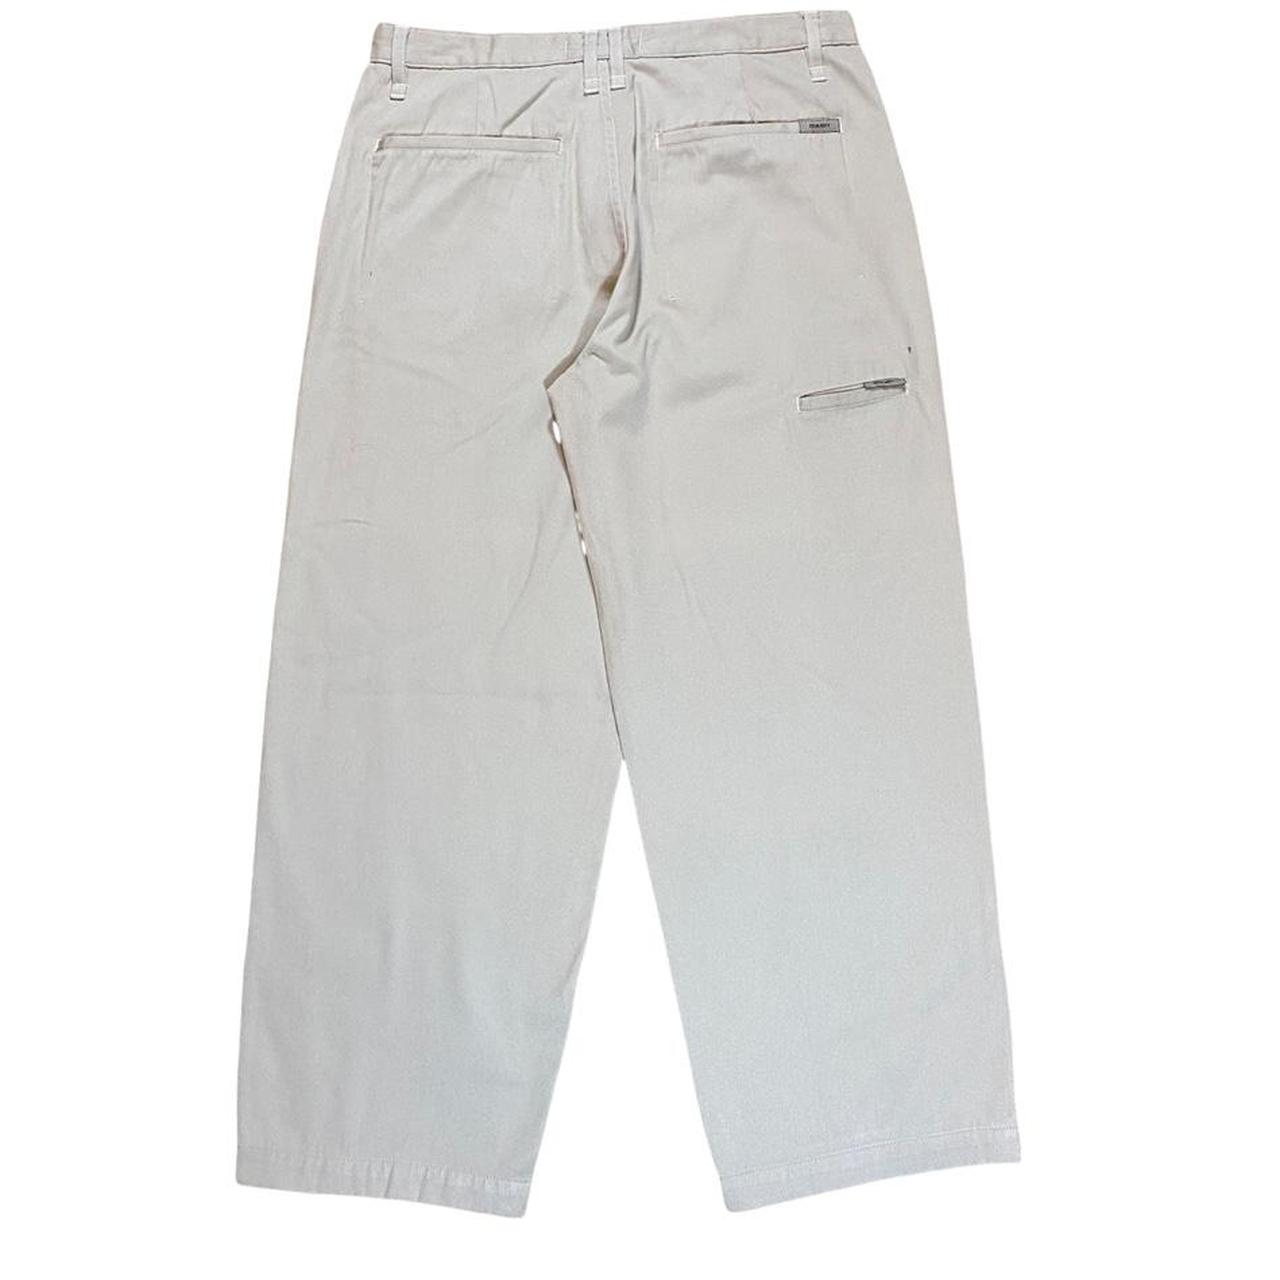 Product Image 2 - Vintage baggy rusty chinos. 

Size: